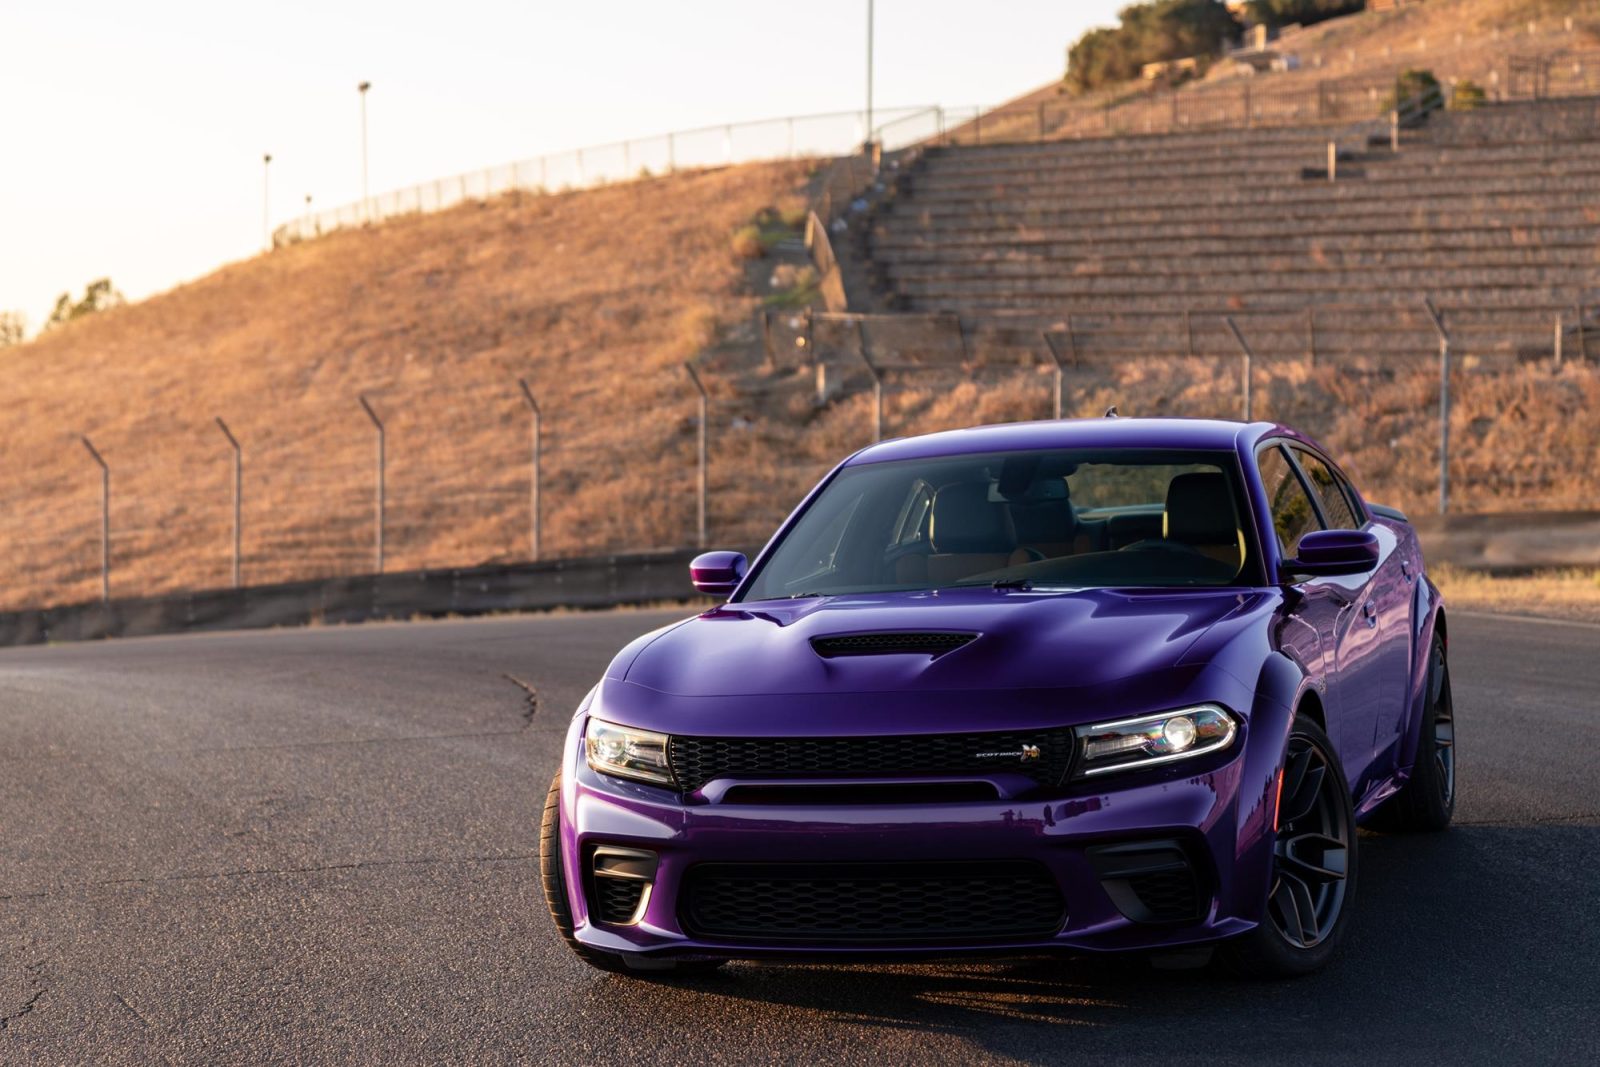 Dodge Teases 2023 Dodge Charger and Dodge Challenger Lineup, Including